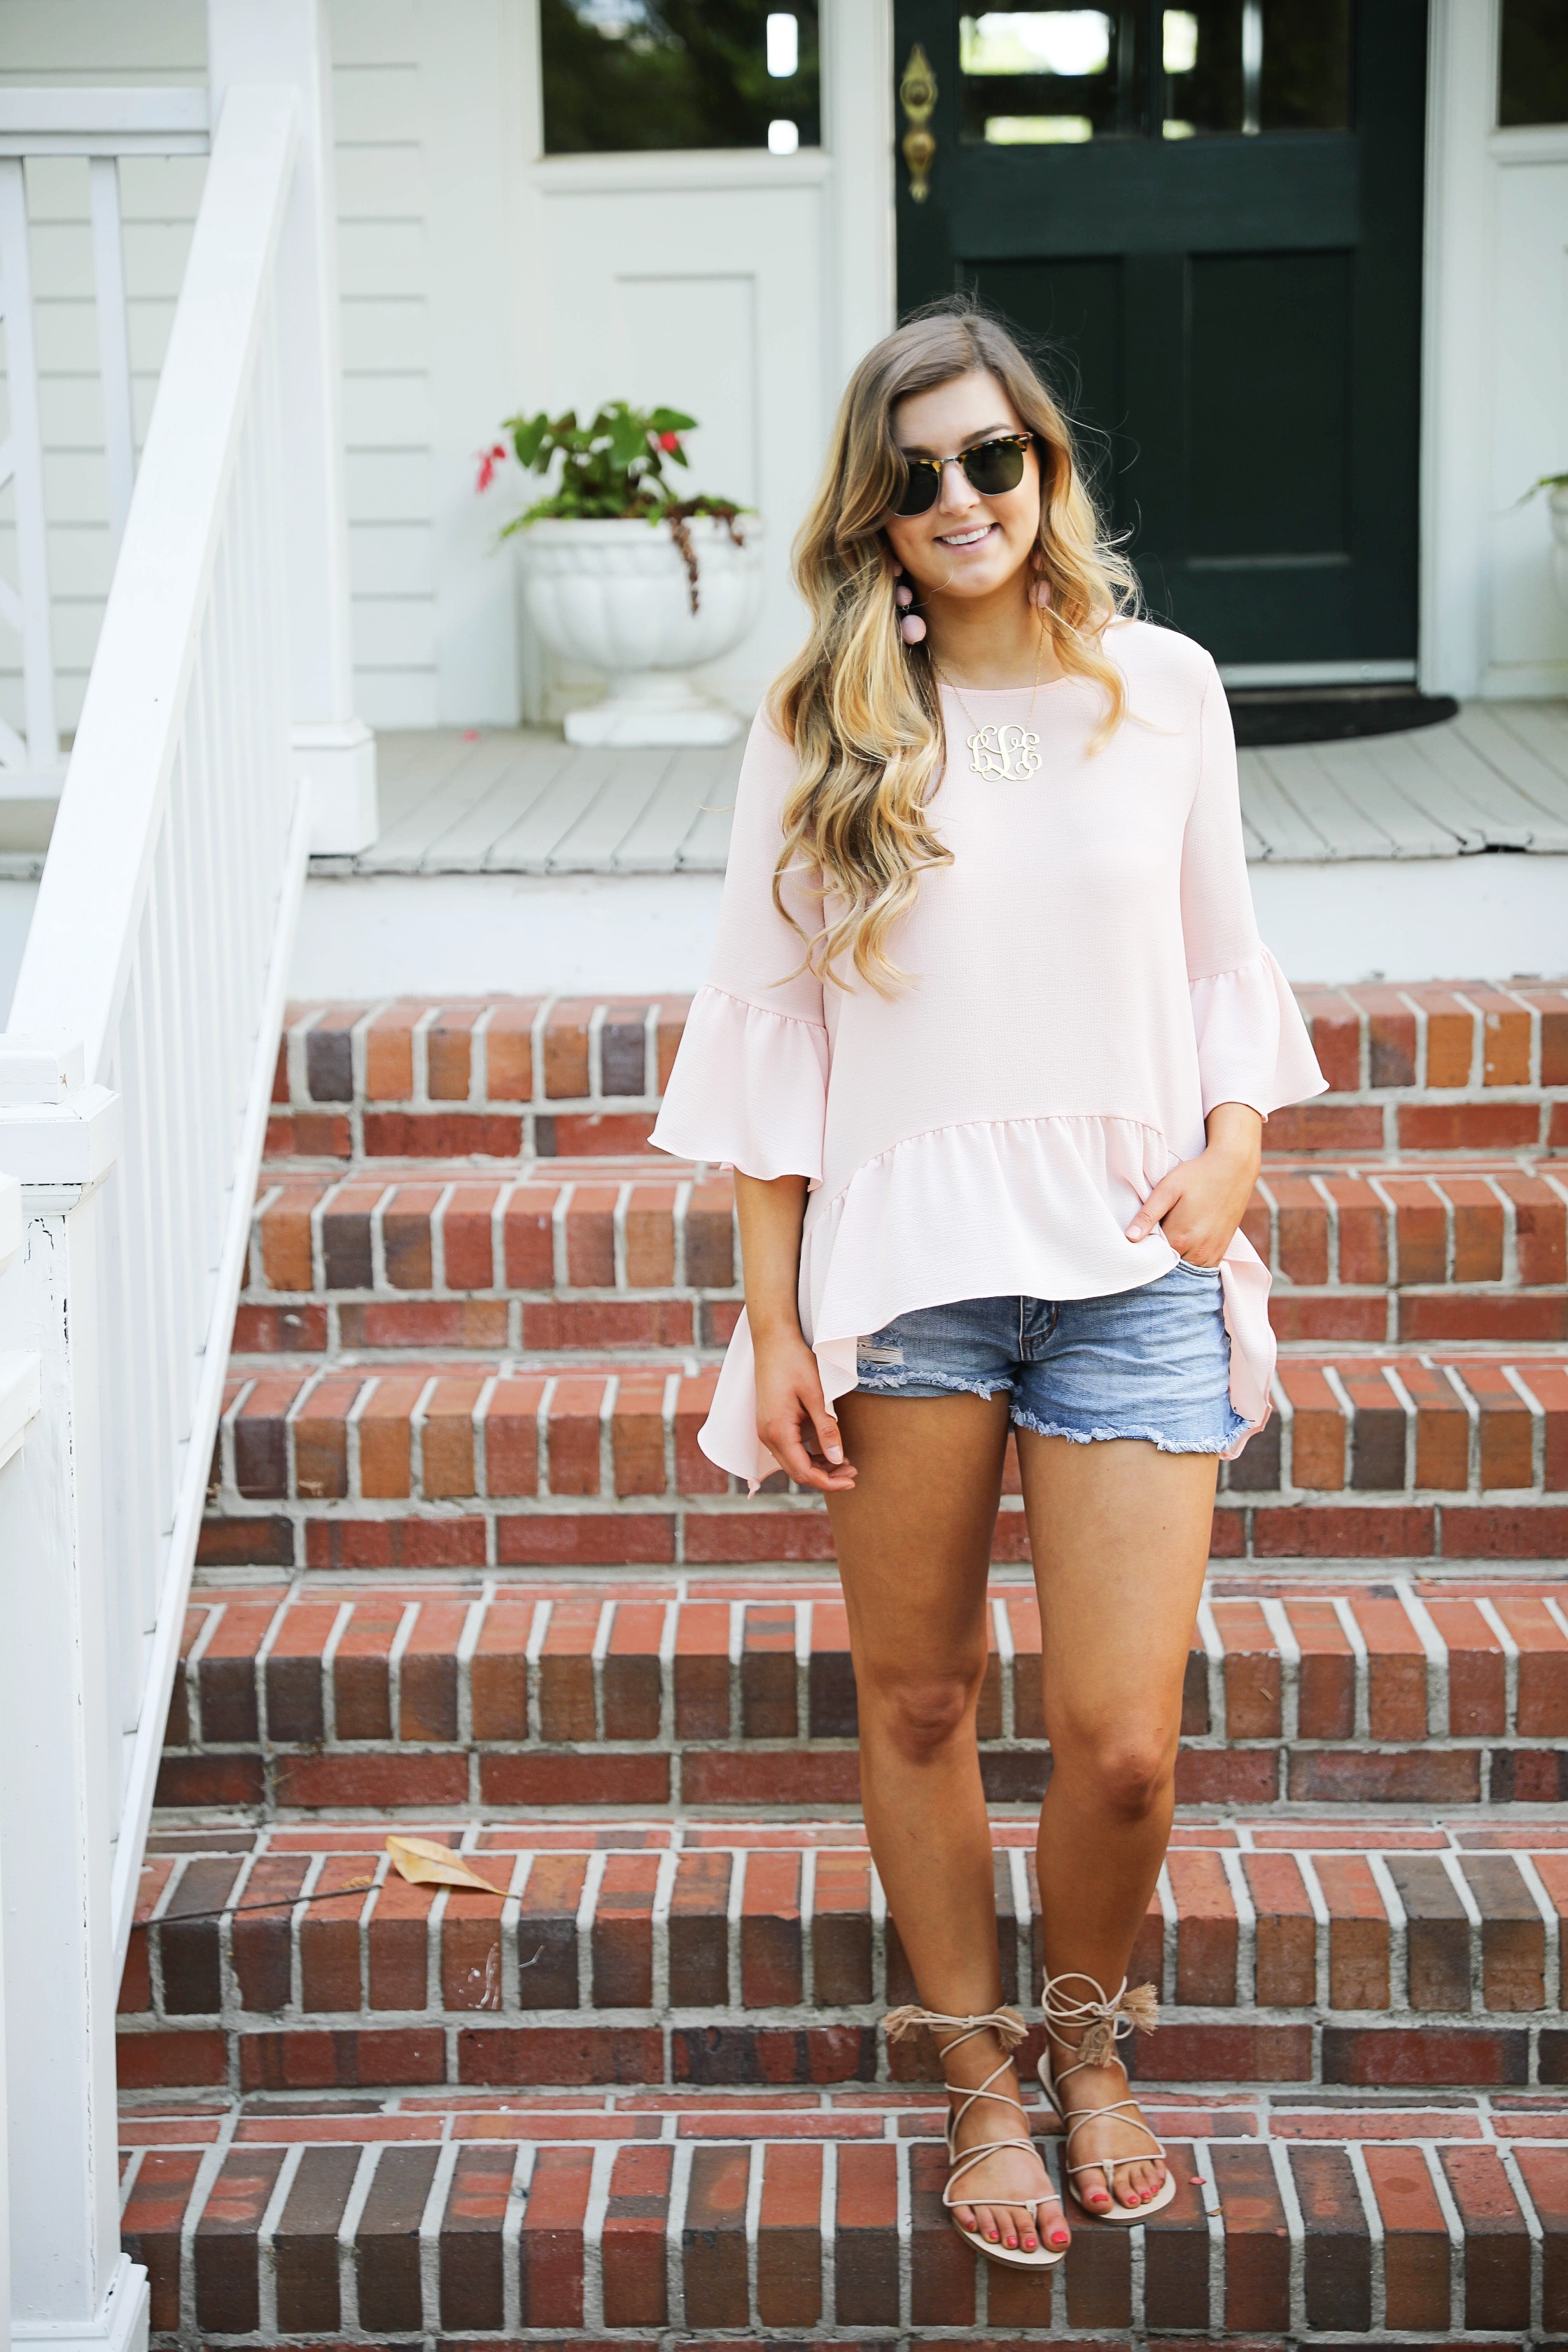 Flowy pink peplum top perfect for a southern outfit! Georgia porch outfit from Nordstrom. By fashion blogger Lauren Lindmark on dailydoseofcharm.com daily dose of charm